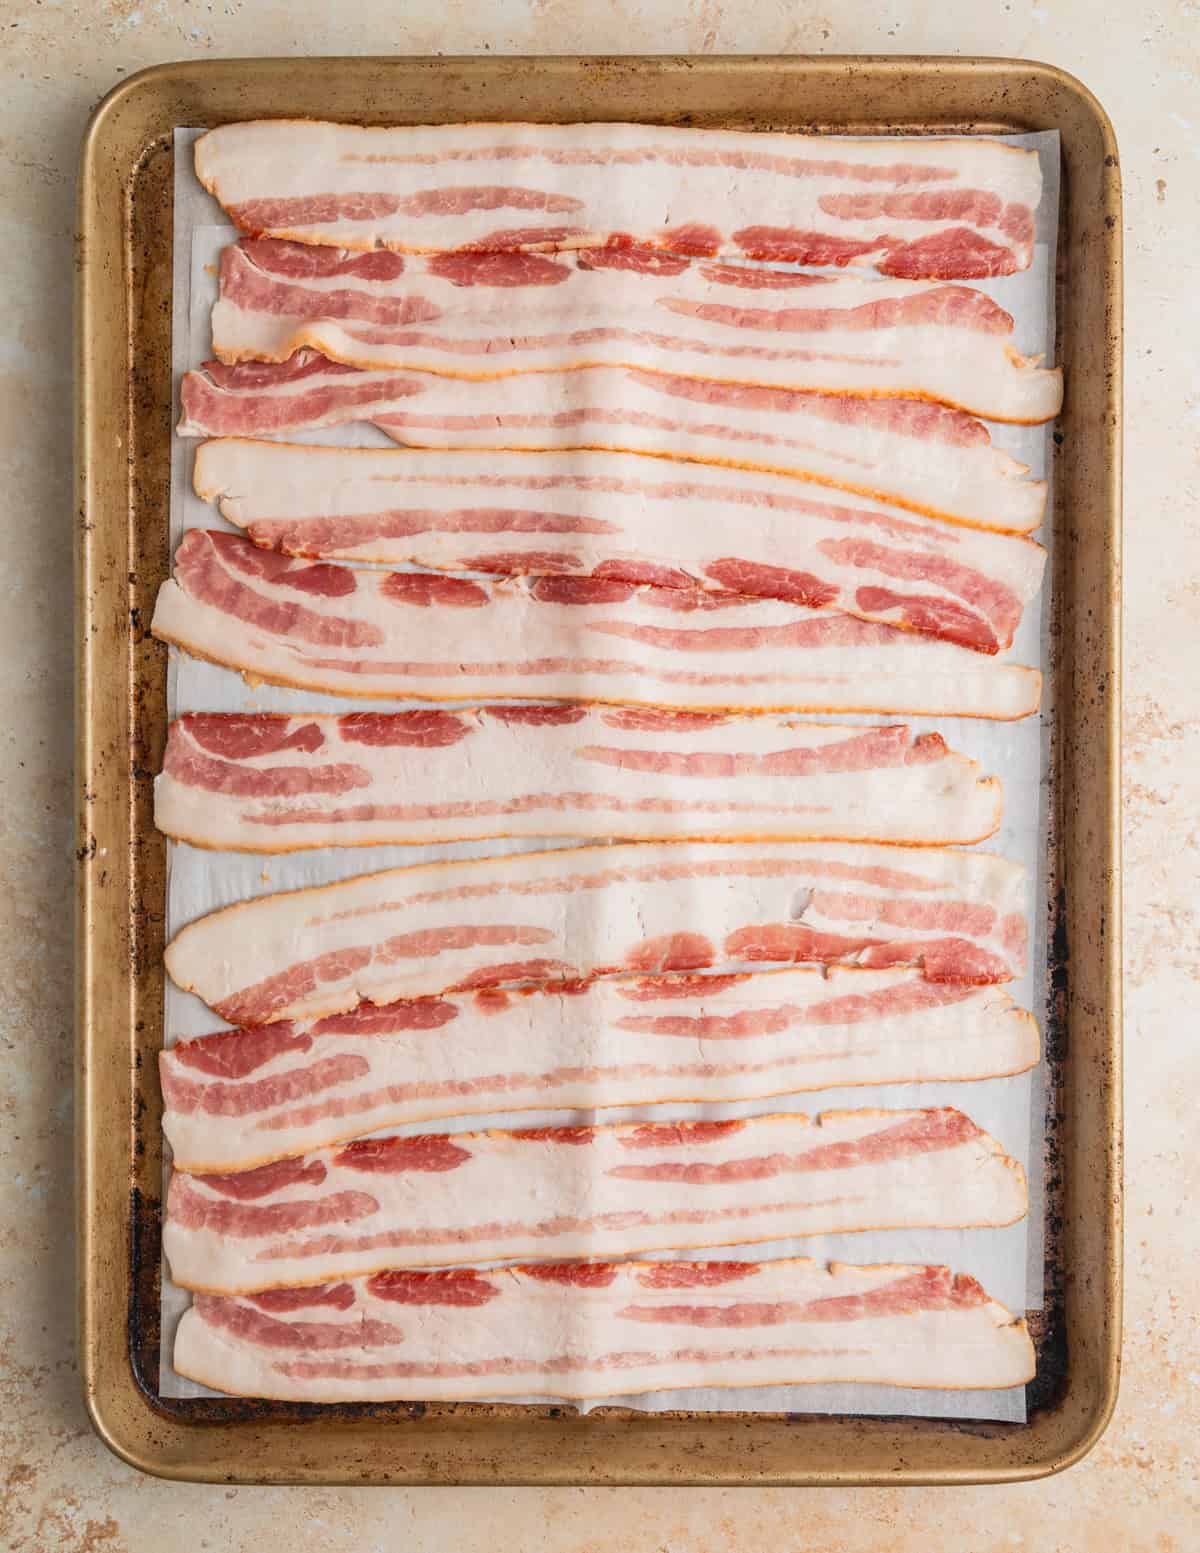 Uncooked bacon on sheetpan lined with parchment.